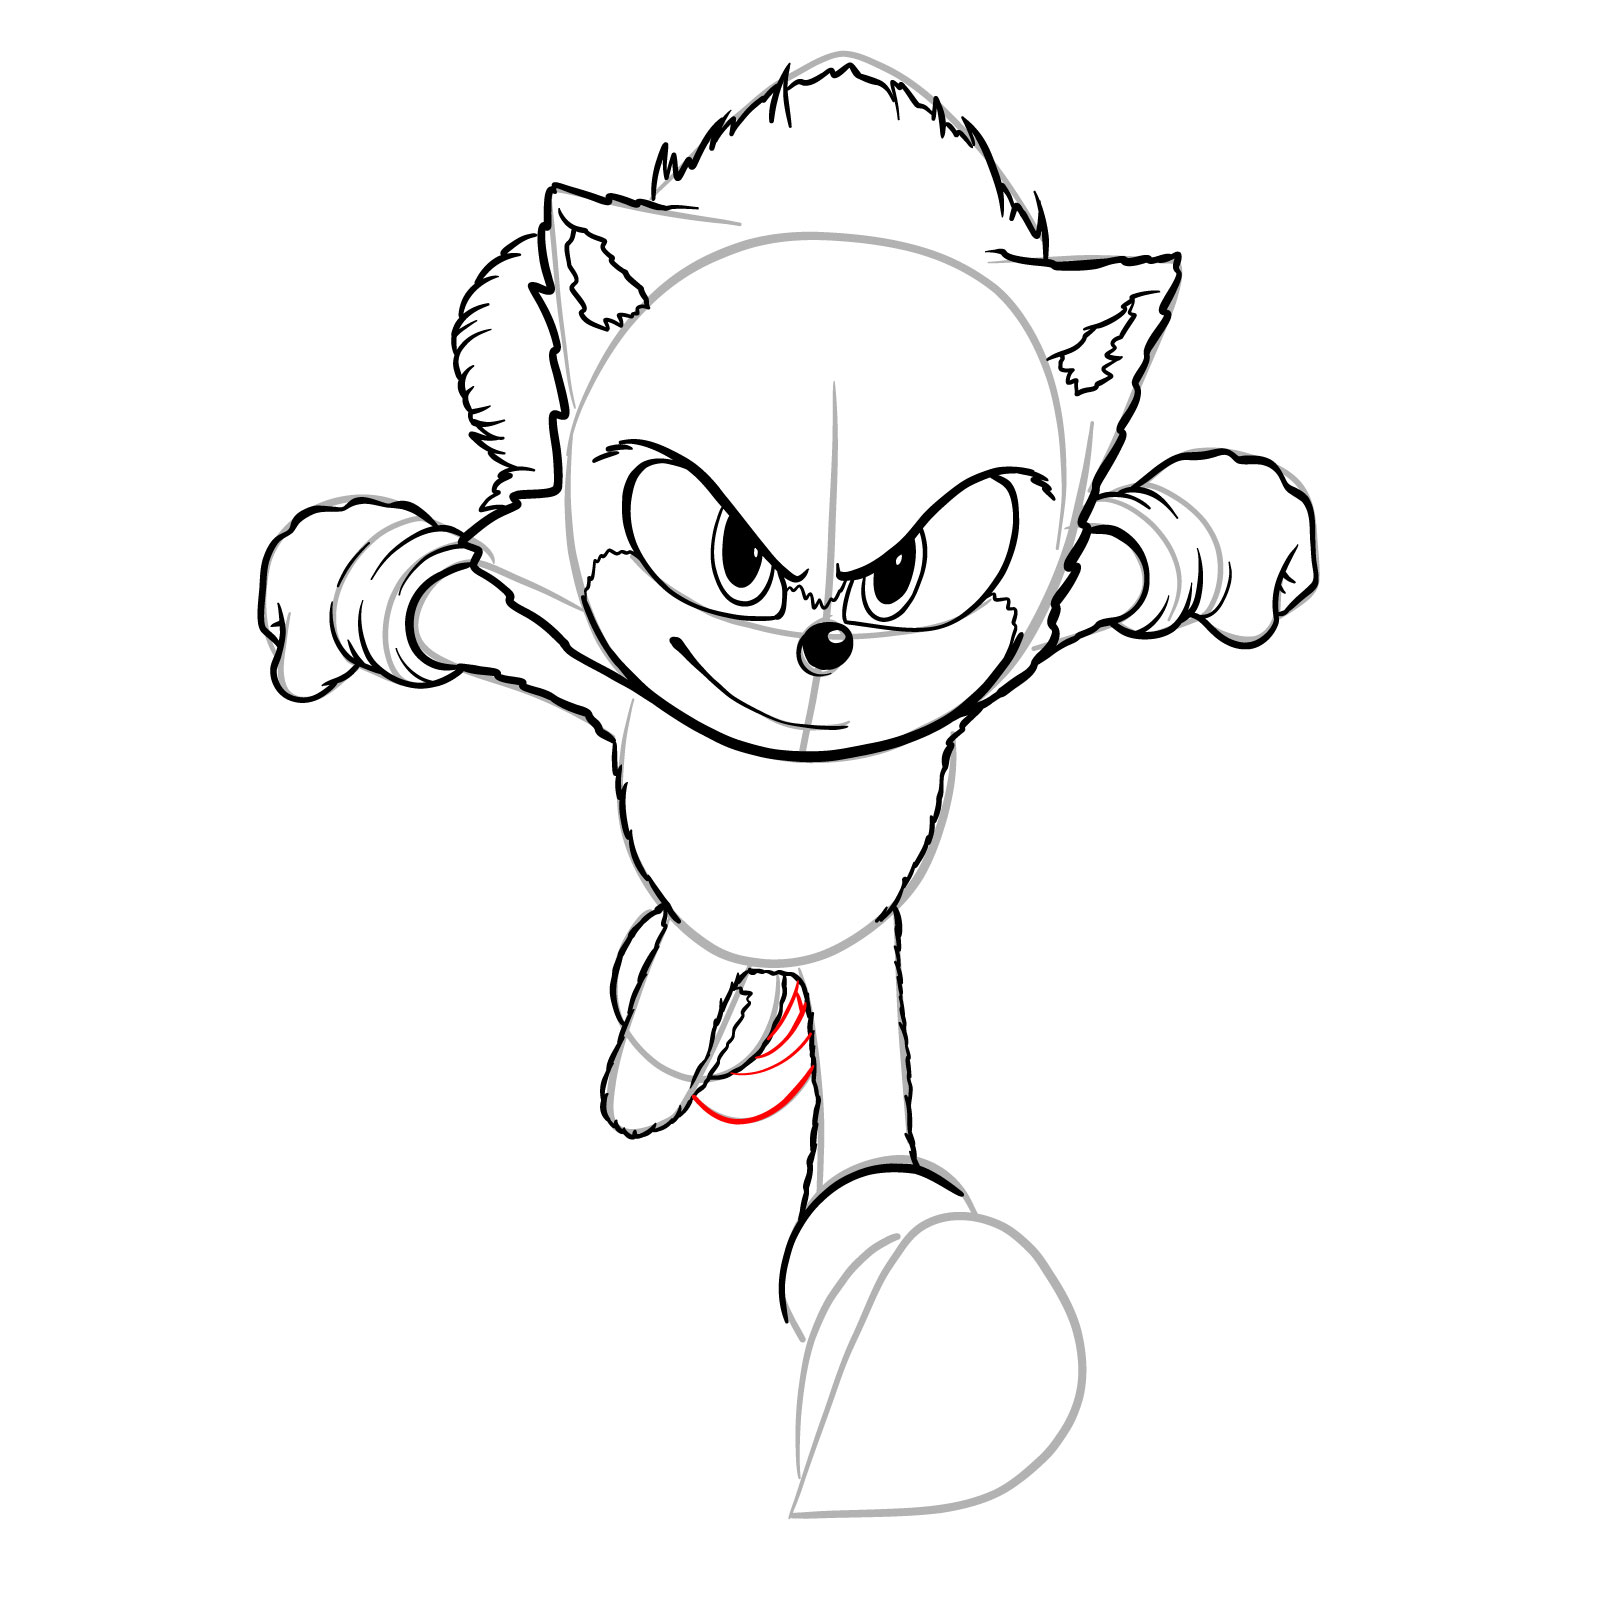 How to draw Sonic from the movie - step 24